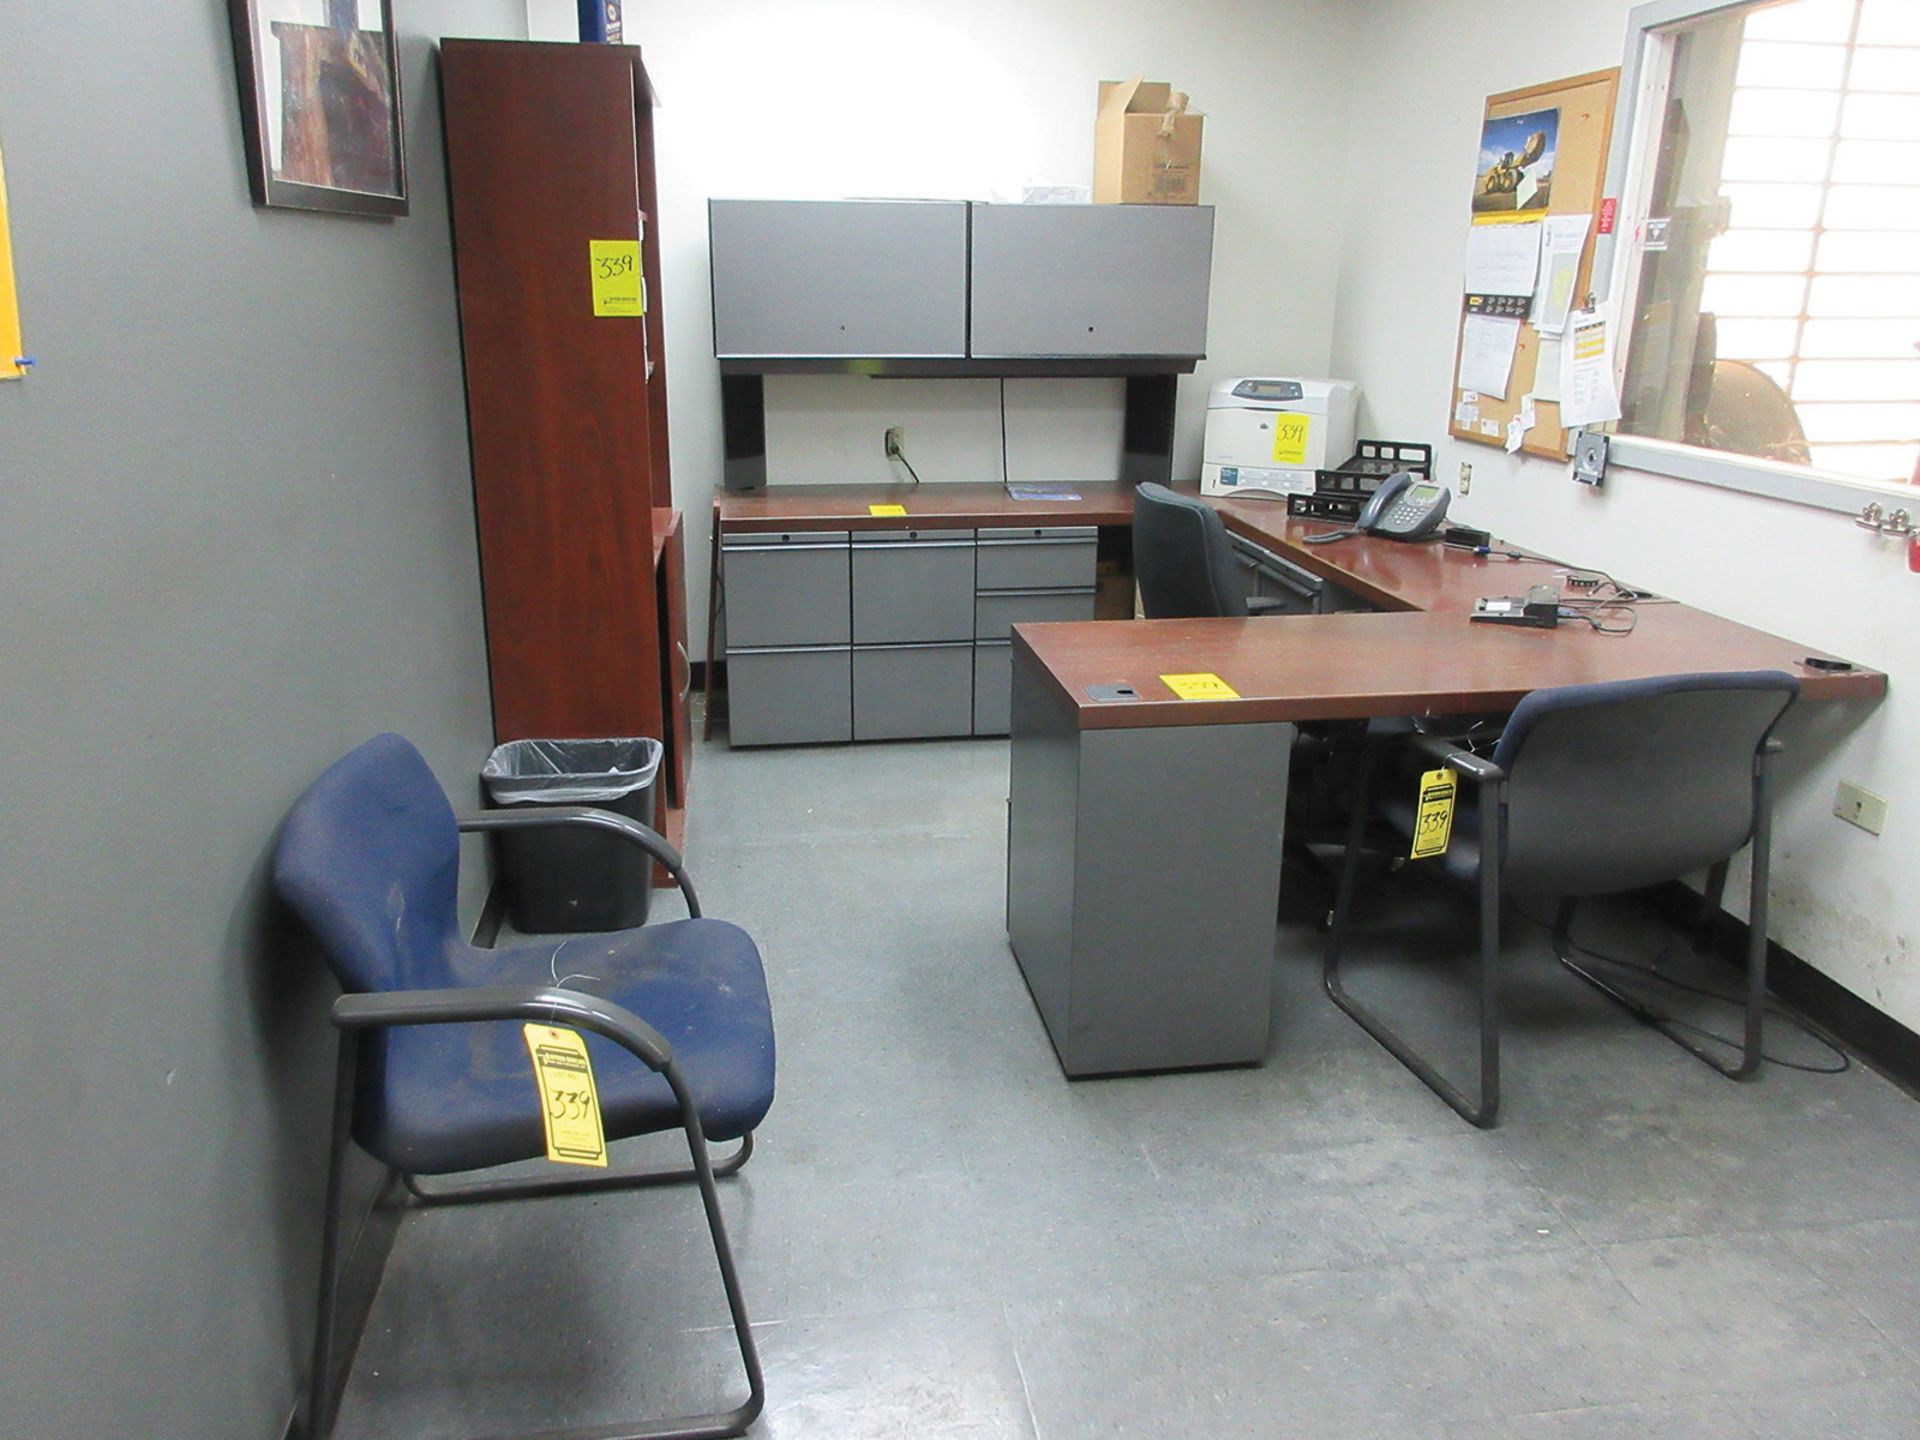 CONTENTS OF OFFICE; U-SHAPE DESK, HUTCH, (3) CHAIRS, AND PRINTER ***LOCATEDIN WEST CHESTER, PA***